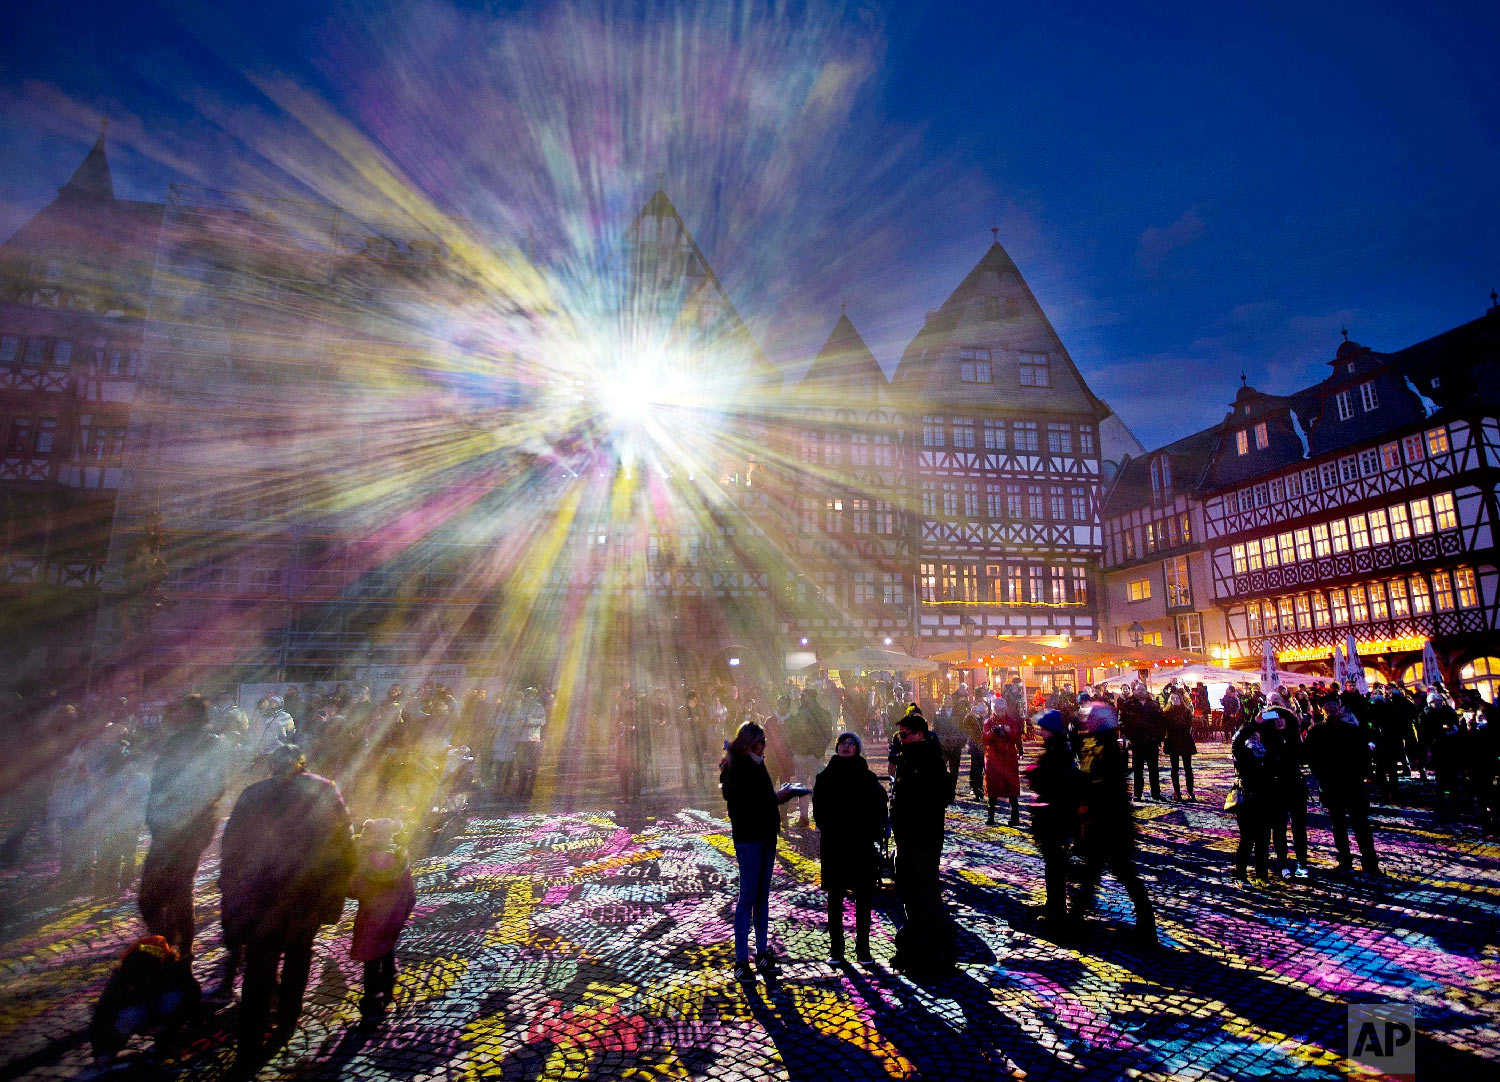  Light shines out from one of the buildings at Roemer Square during the official opening of the "Luminale" light festival in Frankfurt, Germany on March 20, 2018. (AP Photo/Michael Probst) 